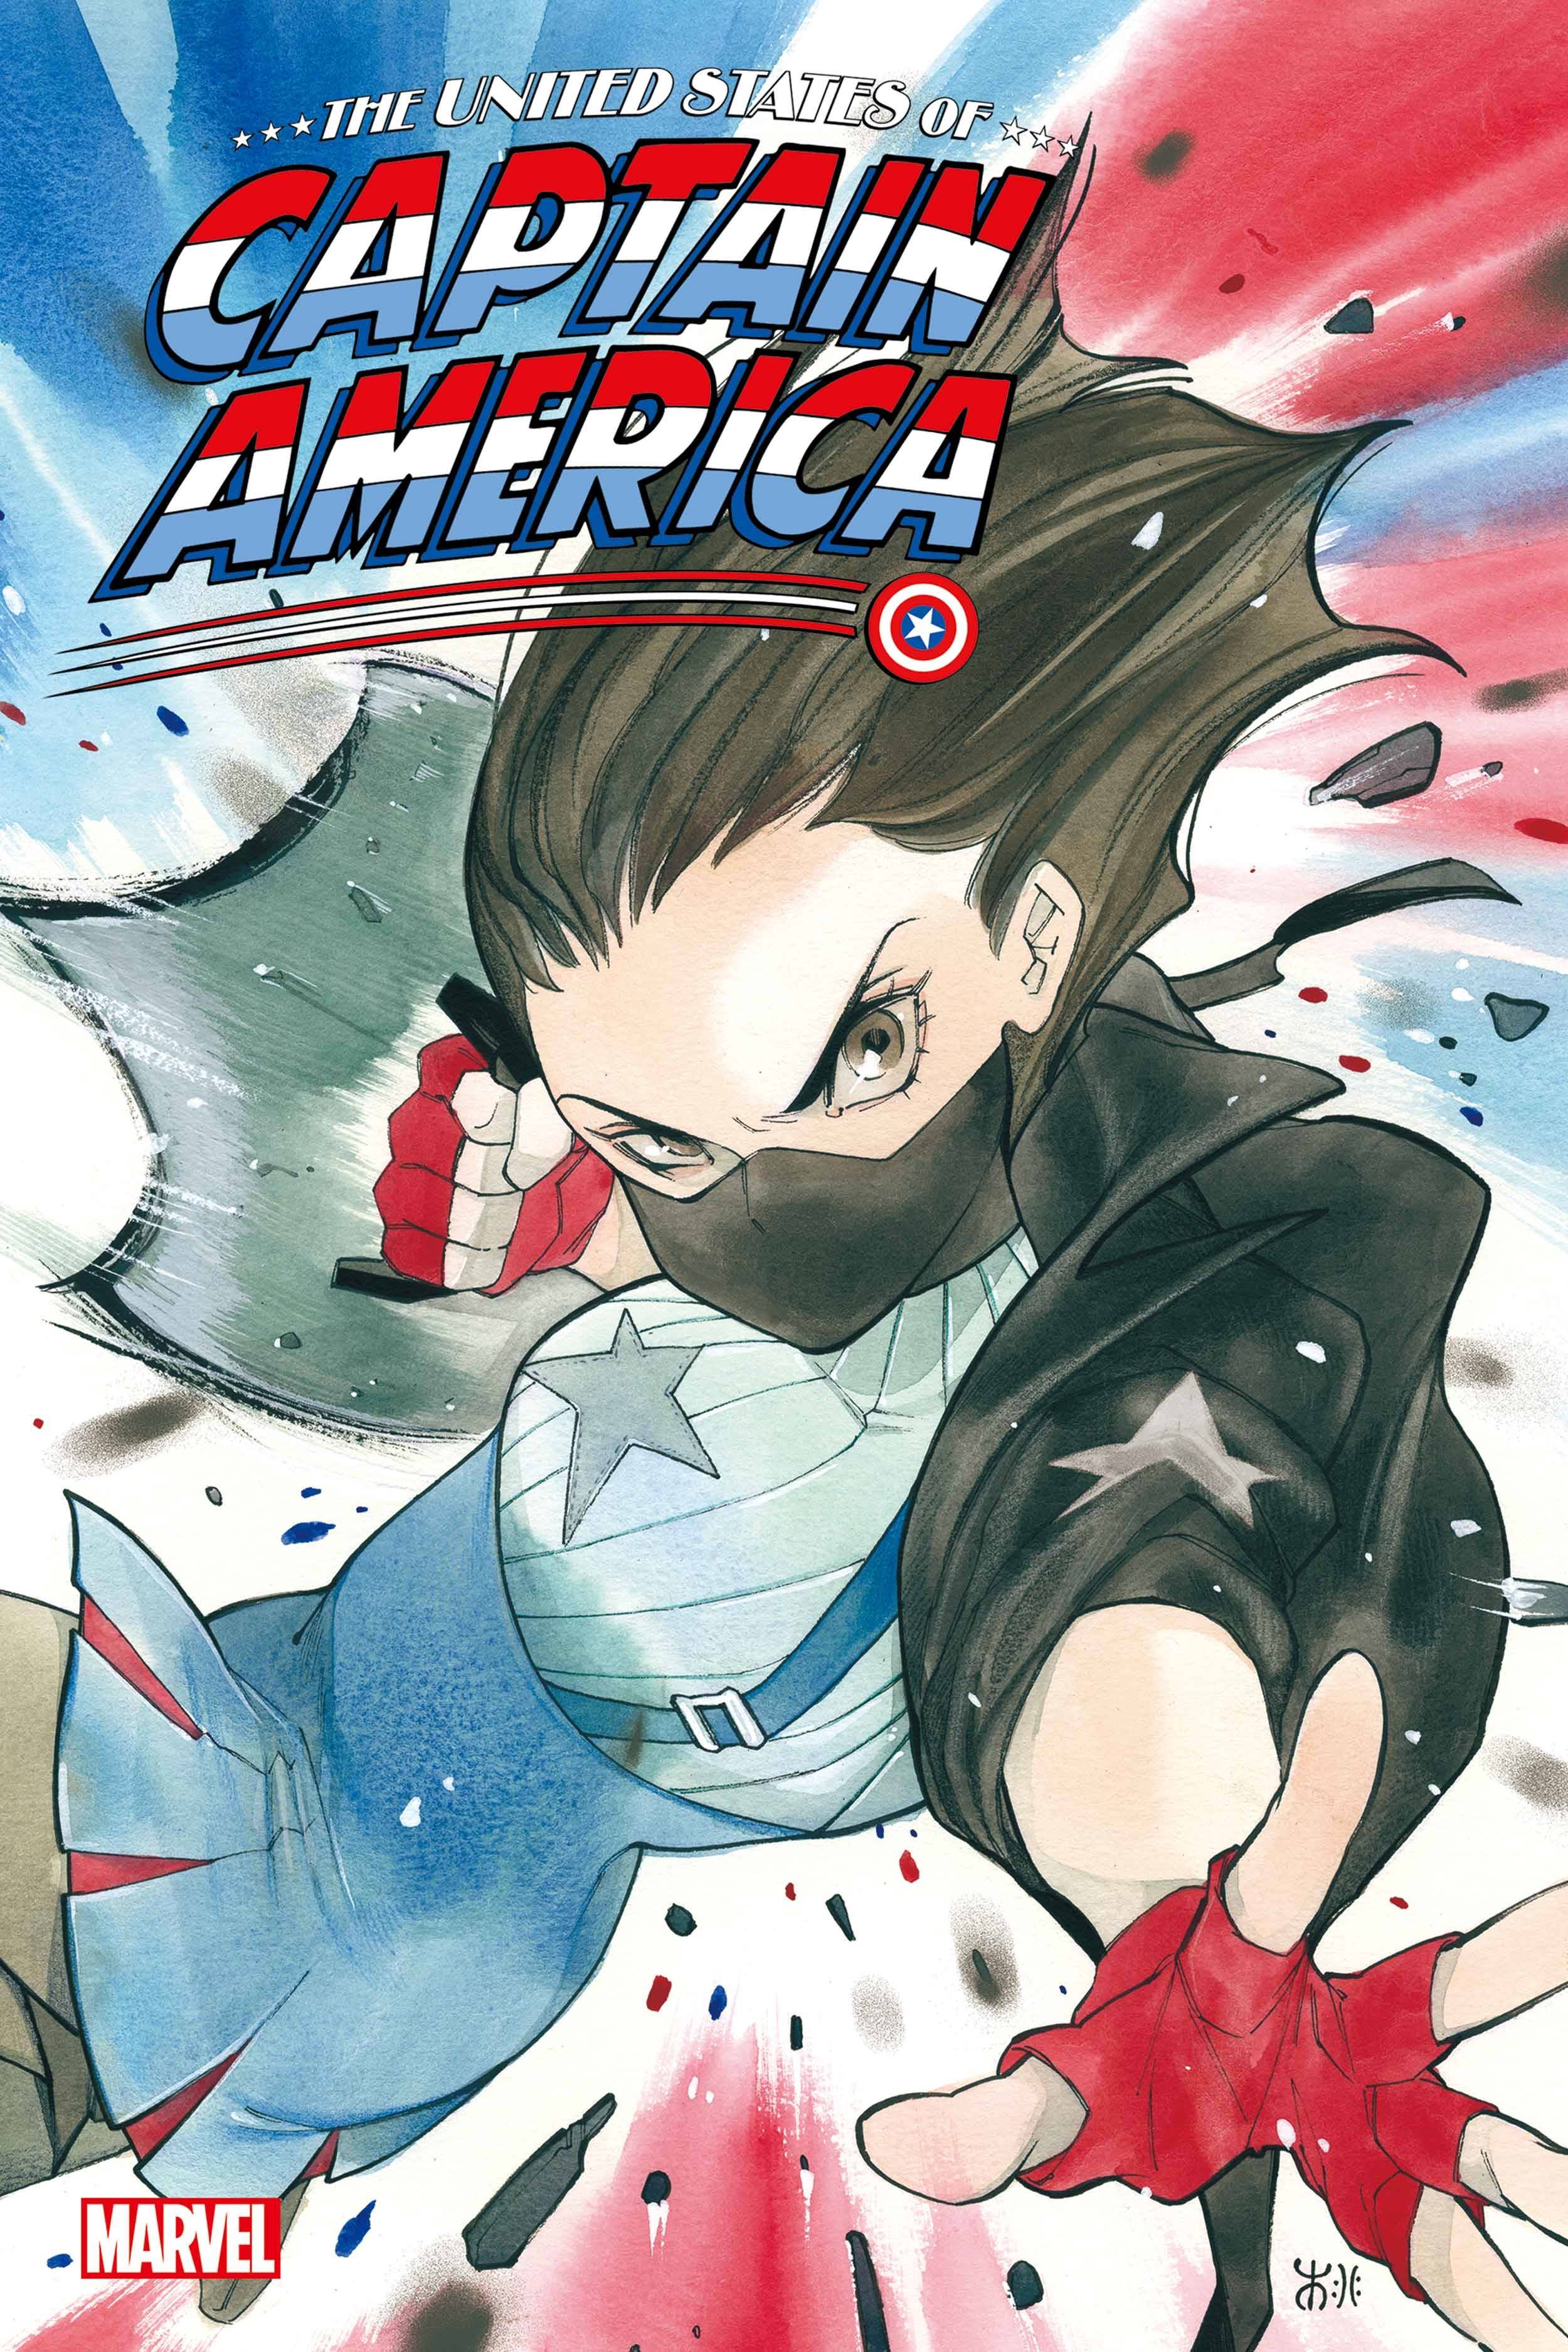 09/22/2021 UNITED STATES CAPTAIN AMERICA #4 (OF 5) MOMOKO 1:25 VARIANT FIRST APPEARANCE OF FILIPINA AMERICAN CAPTAIN AMERICA